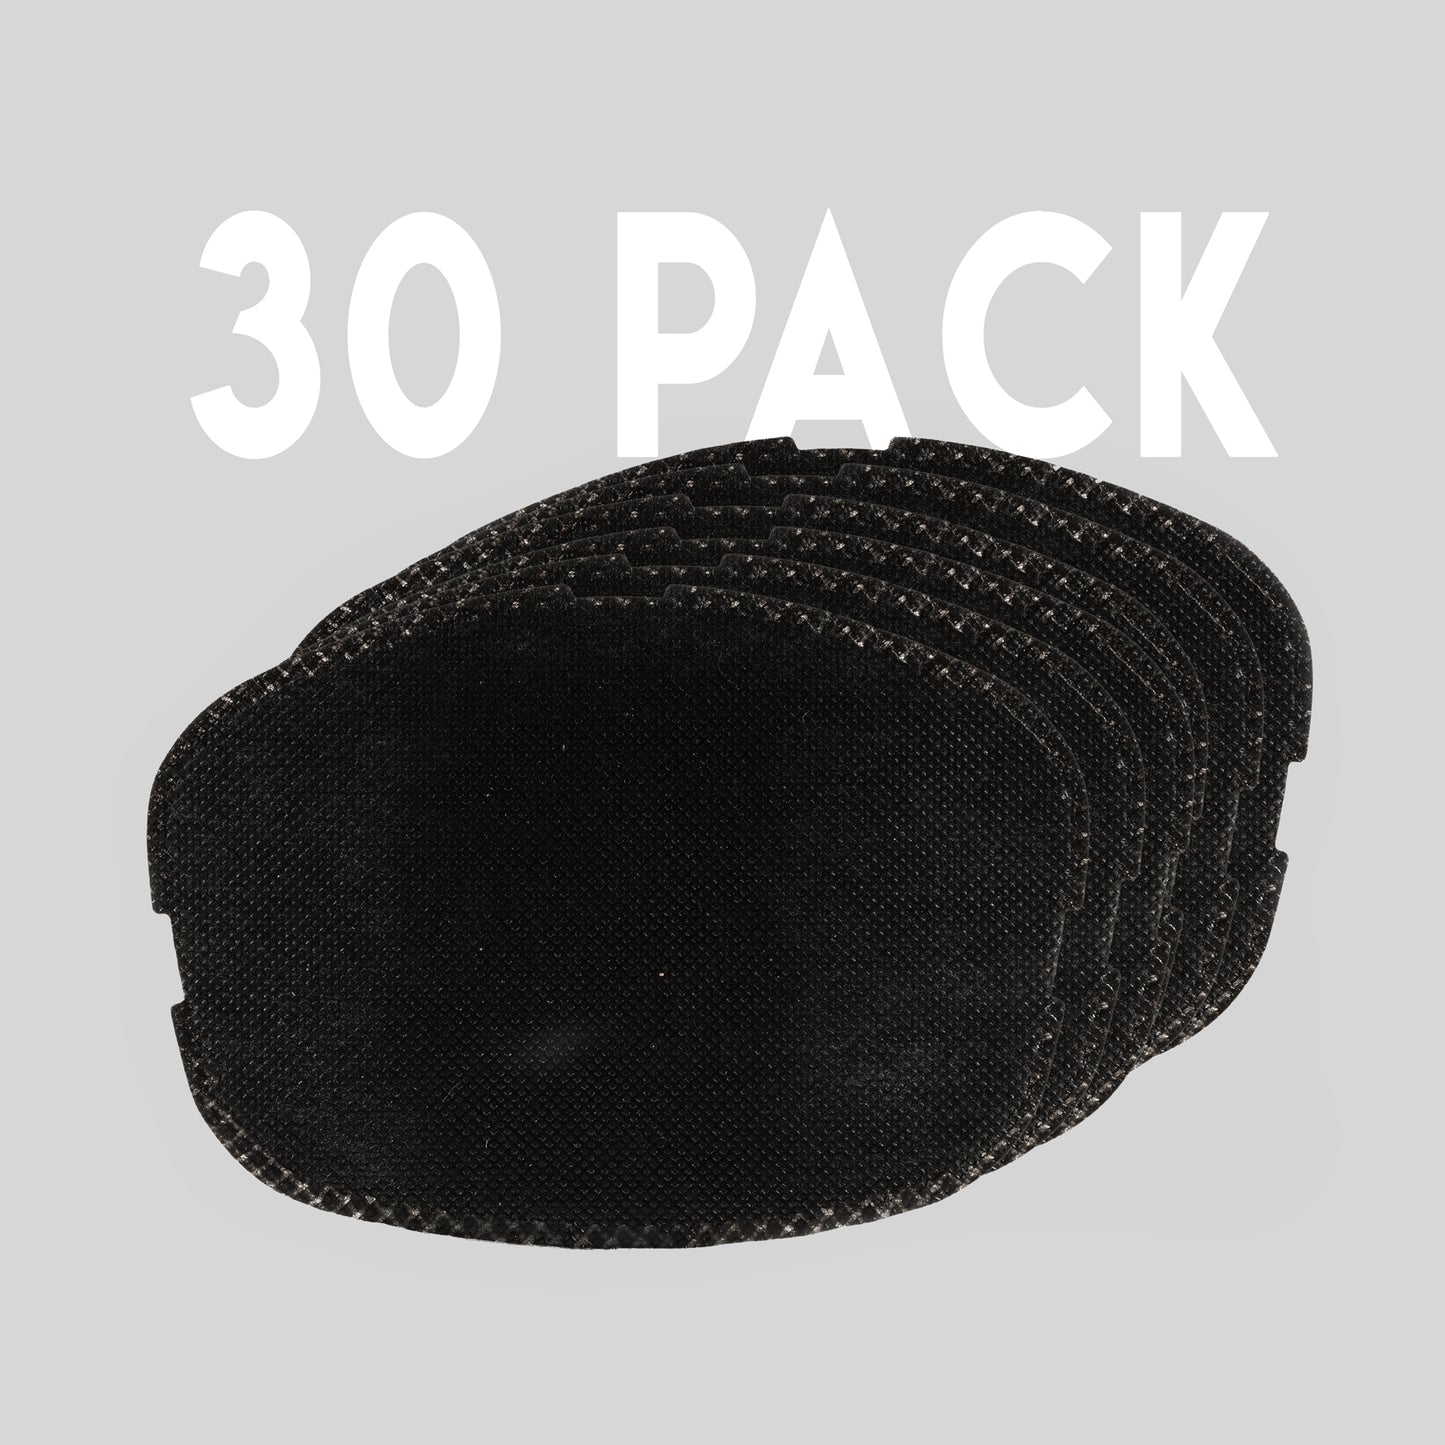 Filter FA95 (30x Pack)